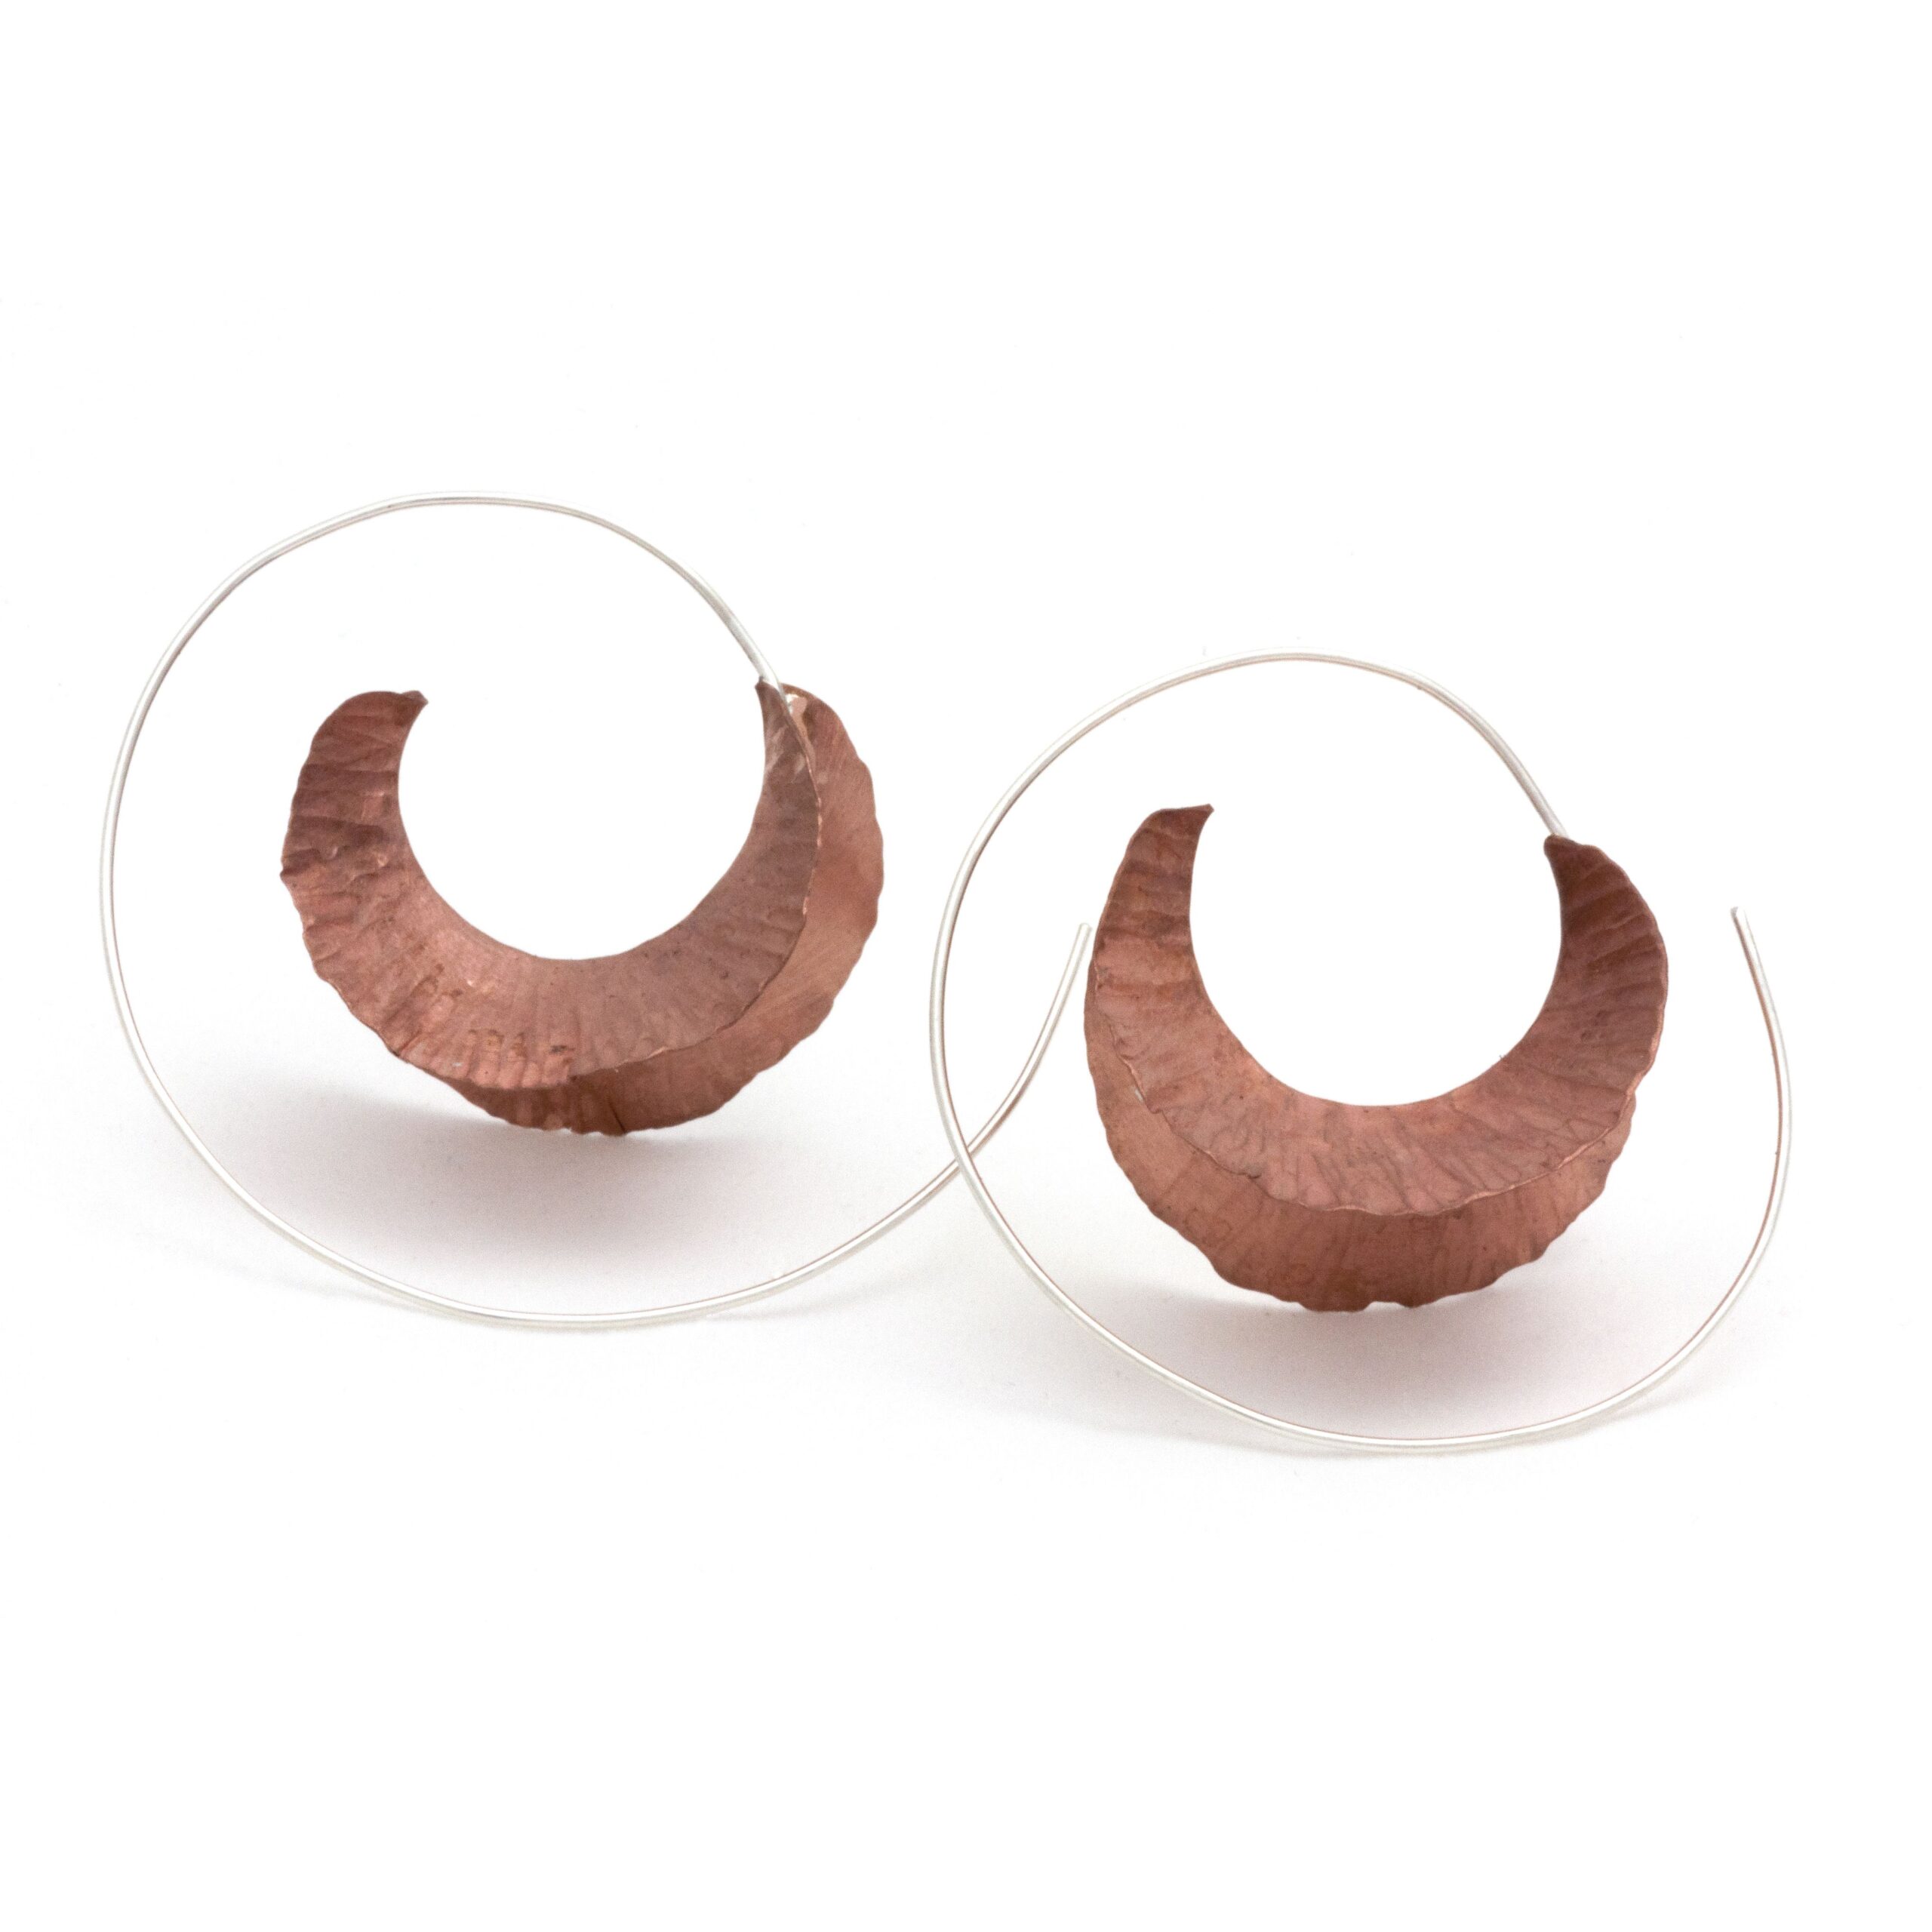 Claudine Moncion: Forge Large Earrings Copper Product Image 1 of 1